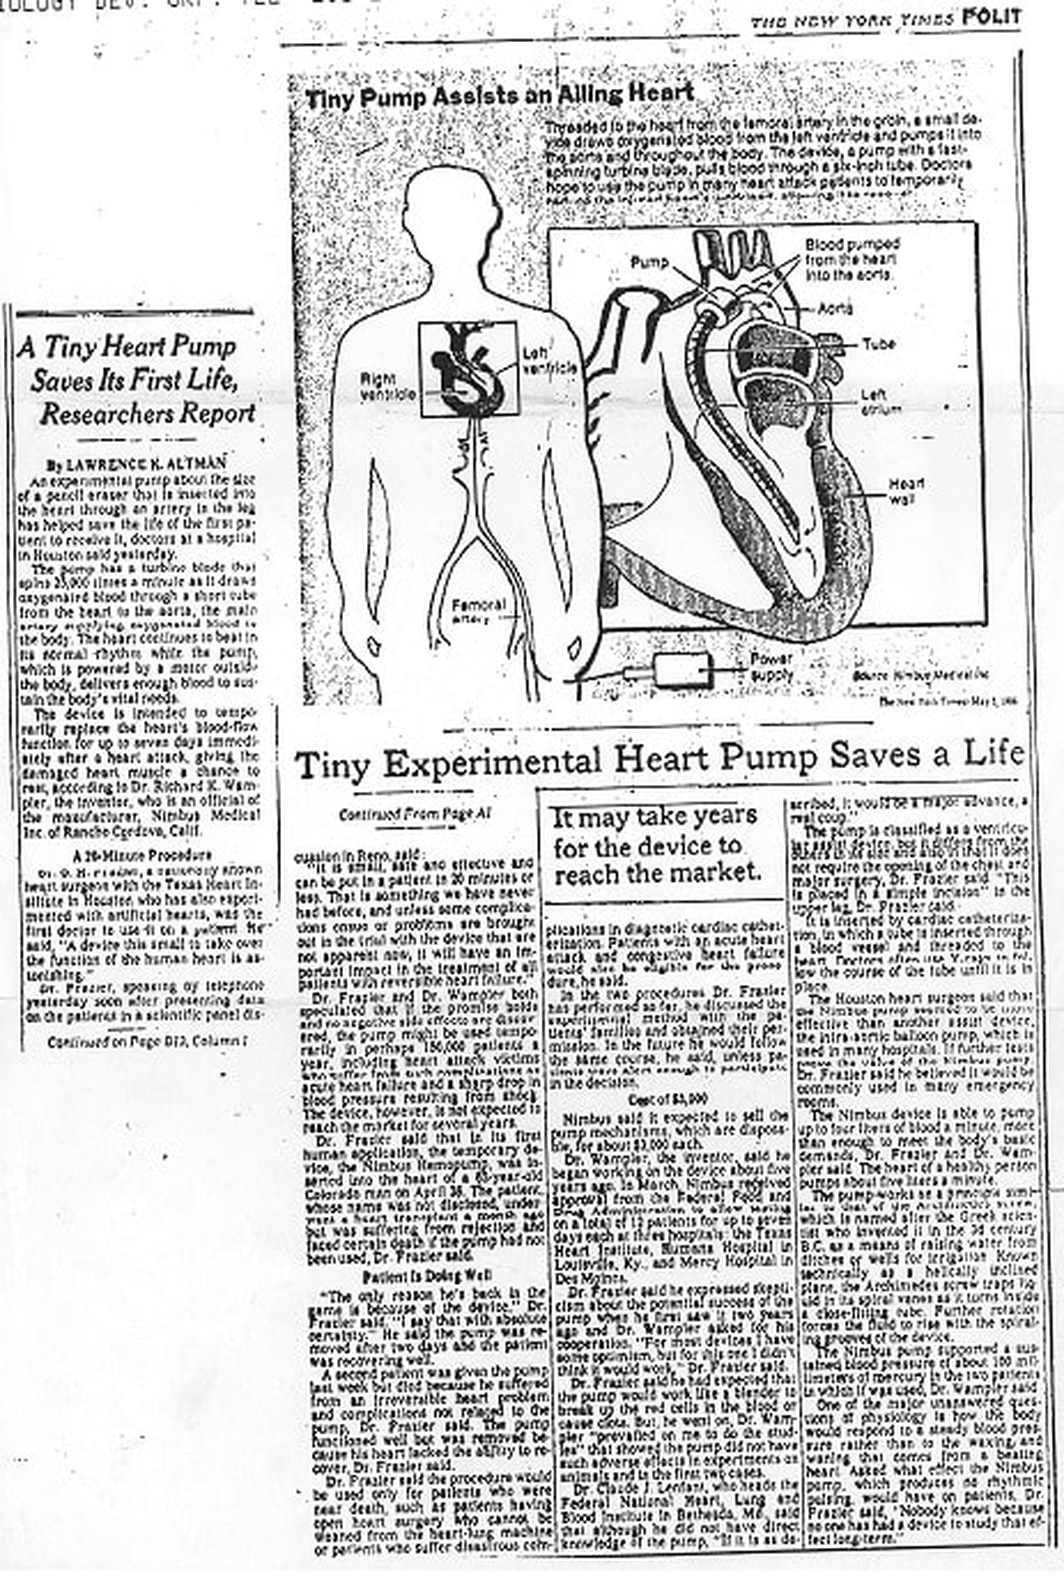 New York Times Article from May 5, 1988 on the Nimbus Hemopump